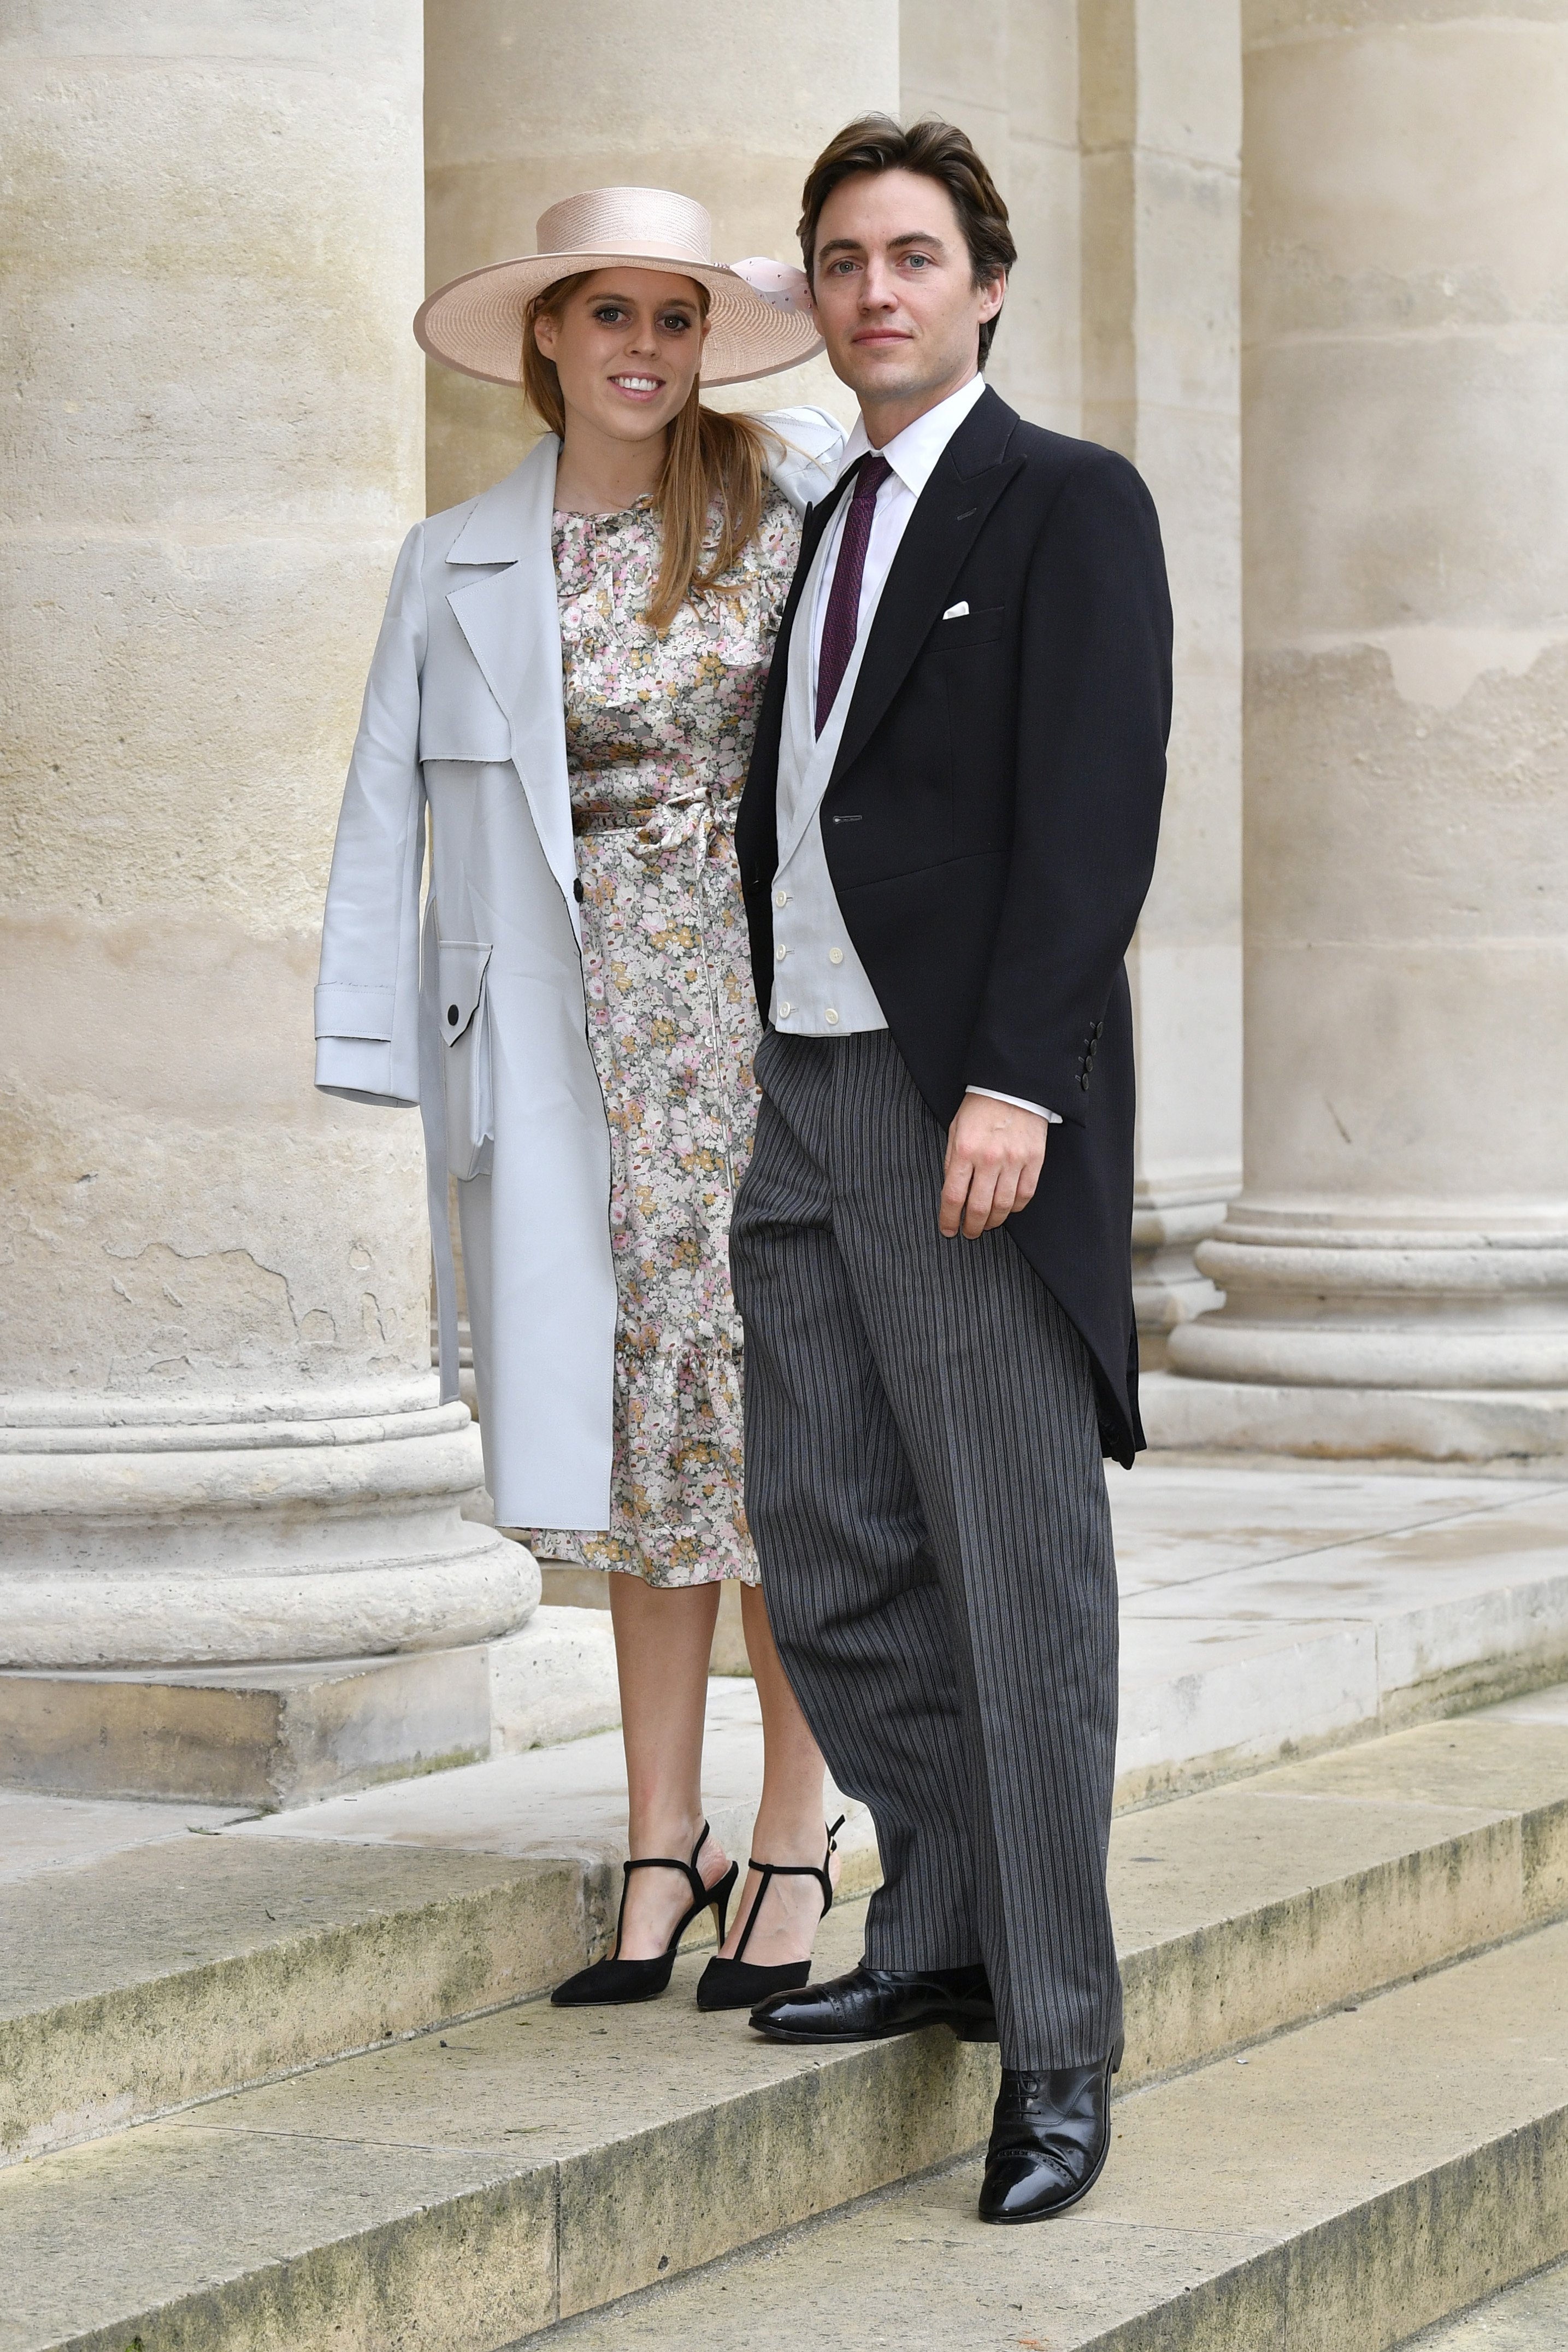 Princess Beatrice and Edoardo Mapelli Mozzi attend the Wedding of Prince Jean-Christophe Napoleon and Olympia Von Arco-Zinneberg at Les Invalides on October 19, 2019 in Paris, France | Photo: Getty Images